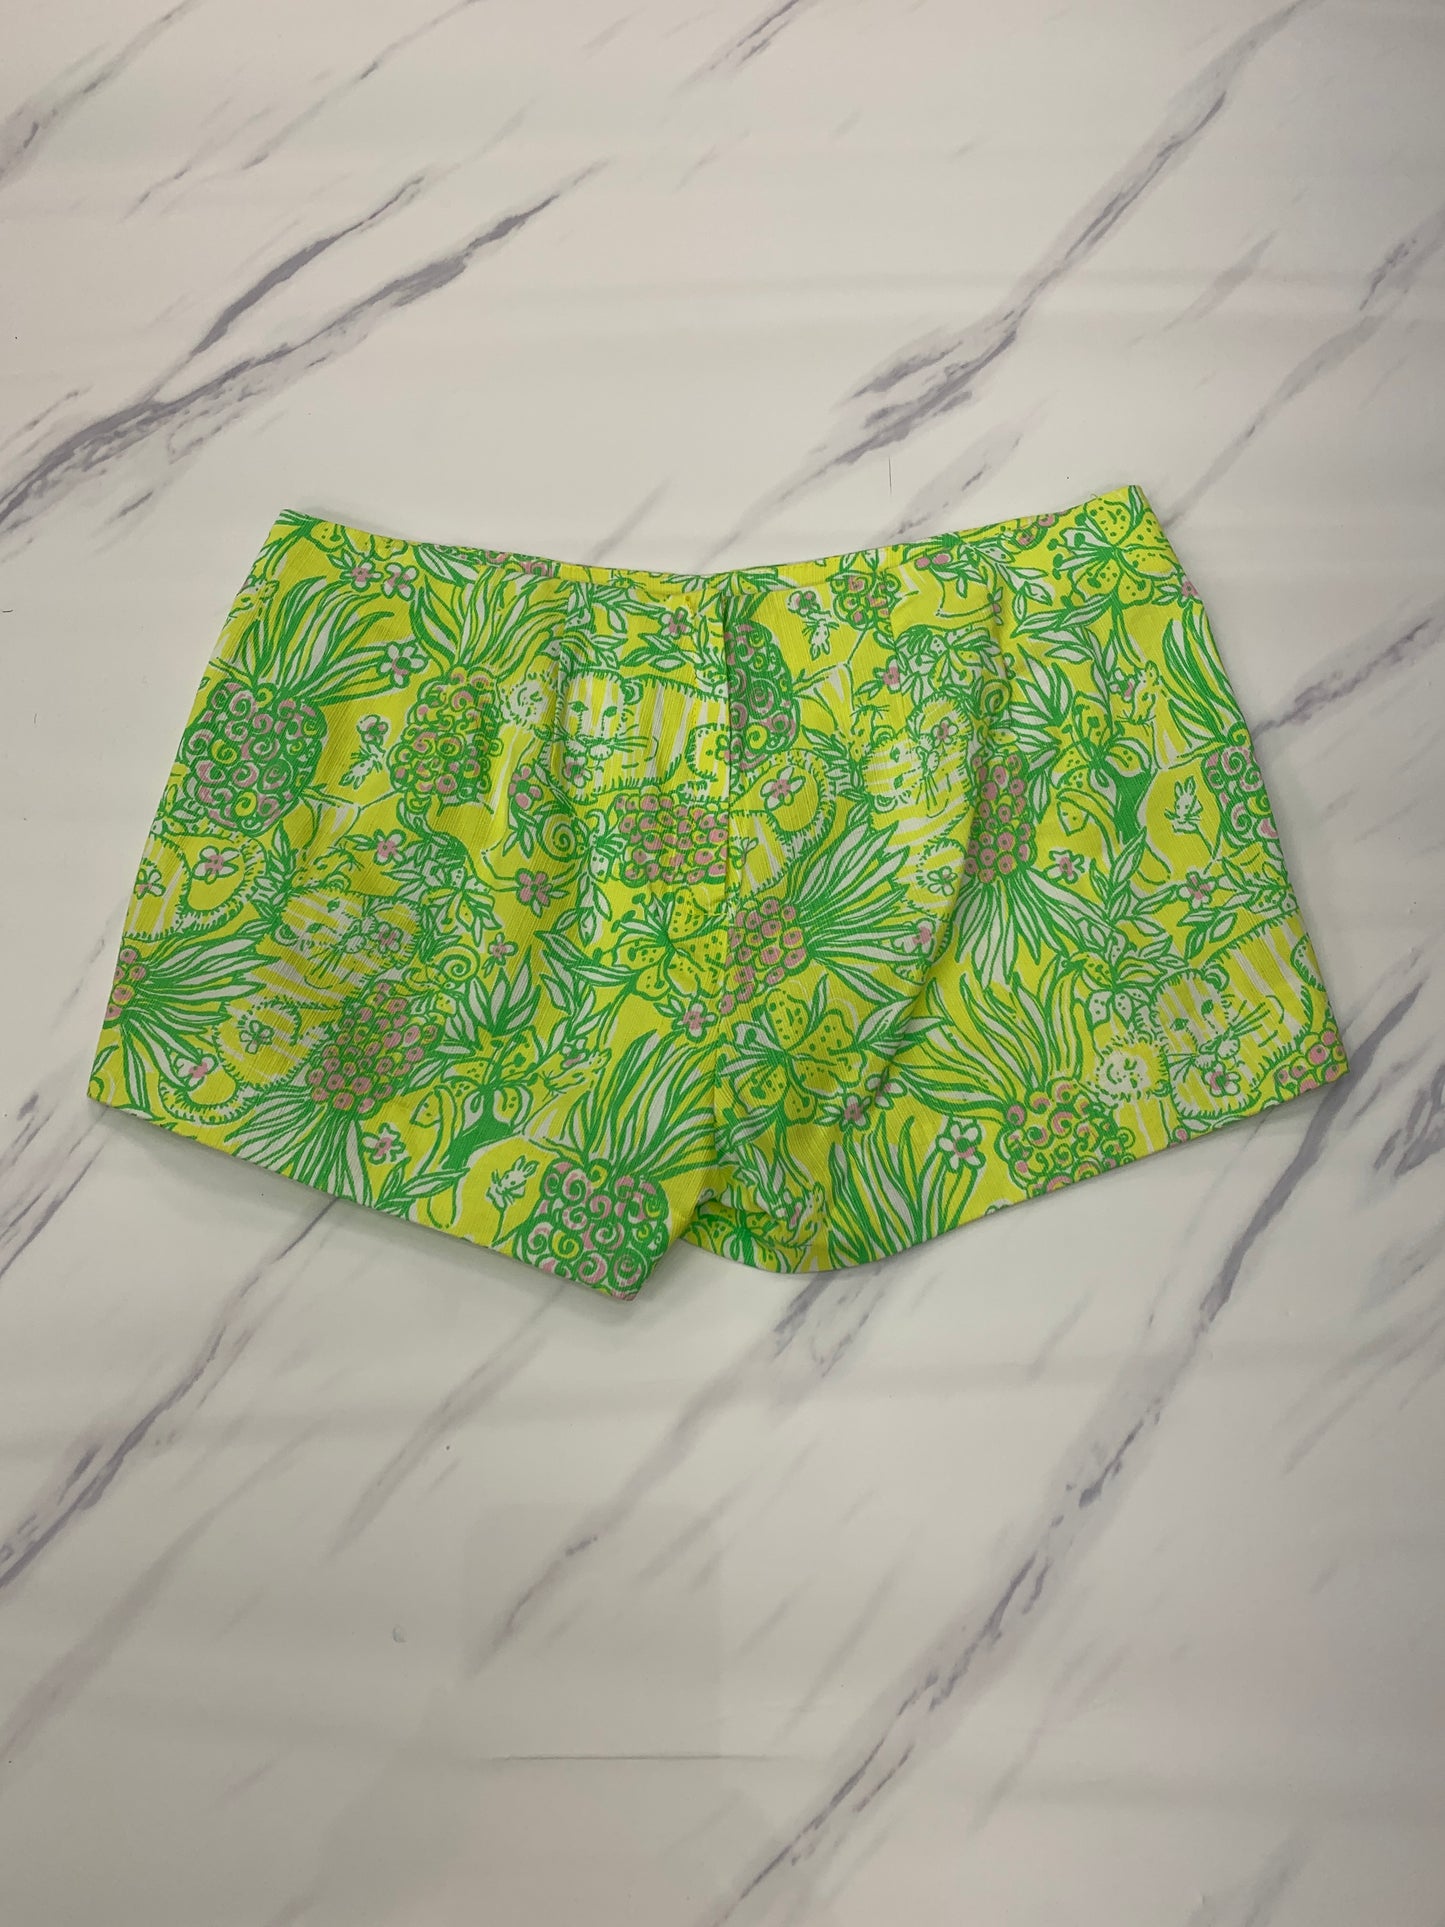 Shorts By Lilly Pulitzer  Size: 6a